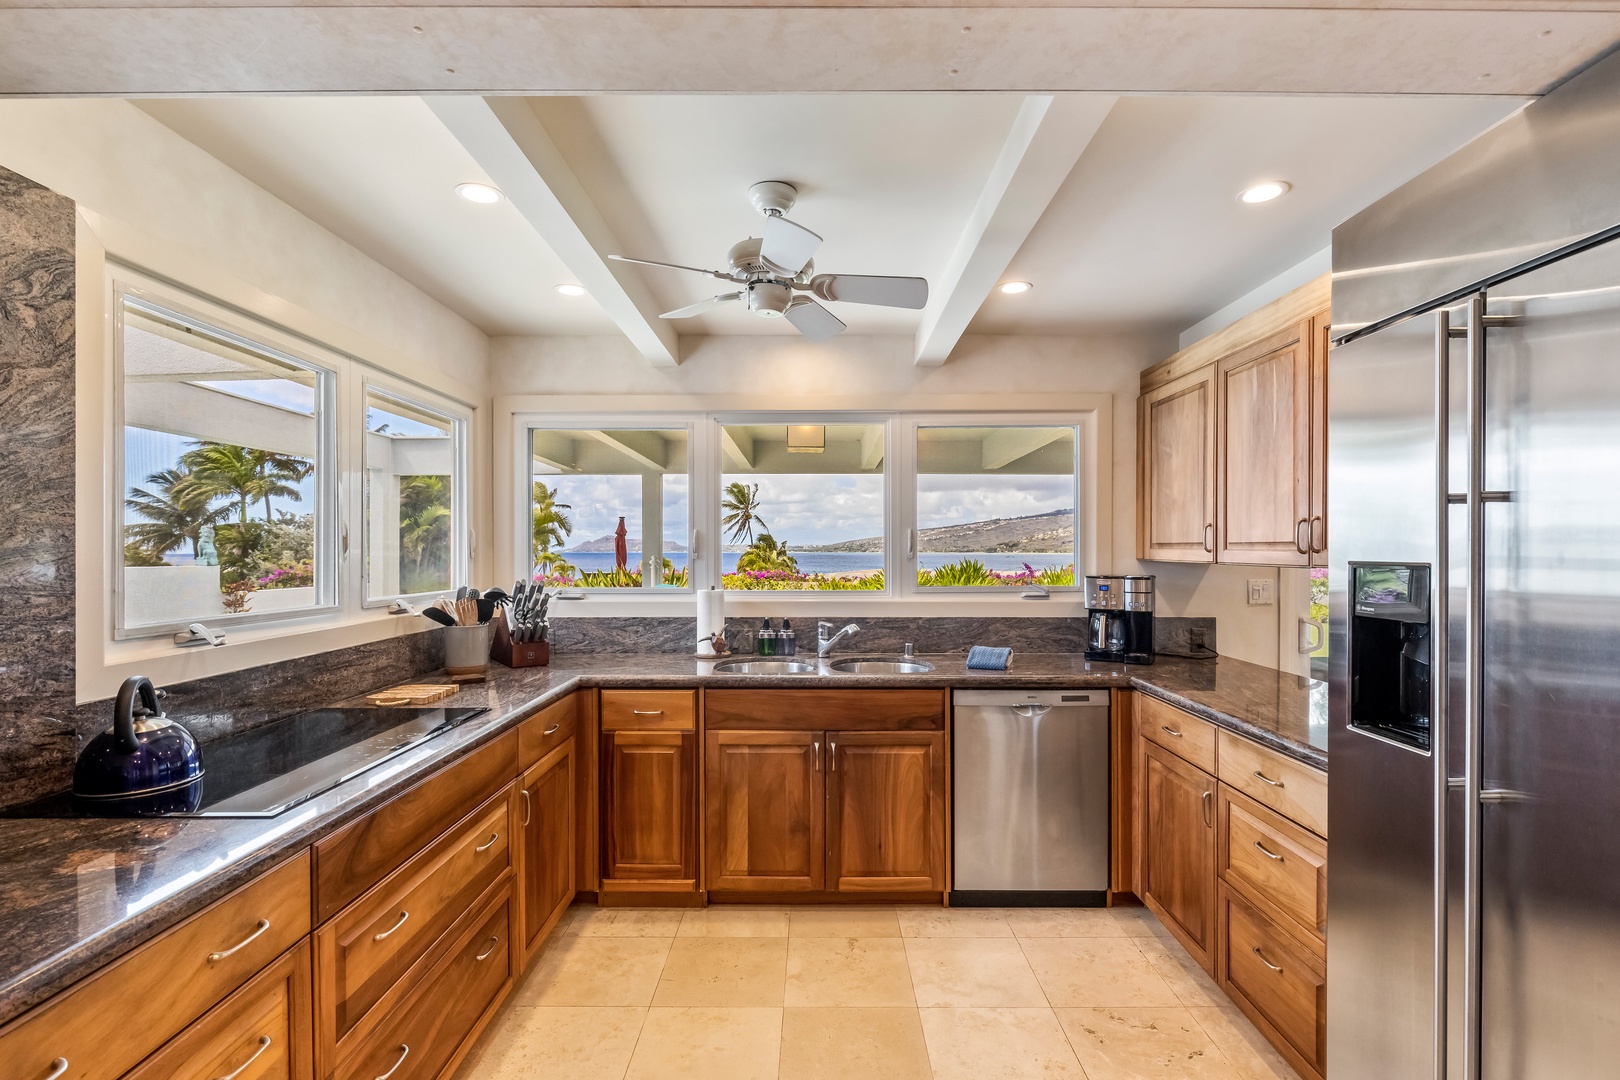 Honolulu Vacation Rentals, Hale Ola - The kitchen is a chef's dream, recently refurbished with gorgeous Koa wood cabinets, granite countertops, stainless steel appliances